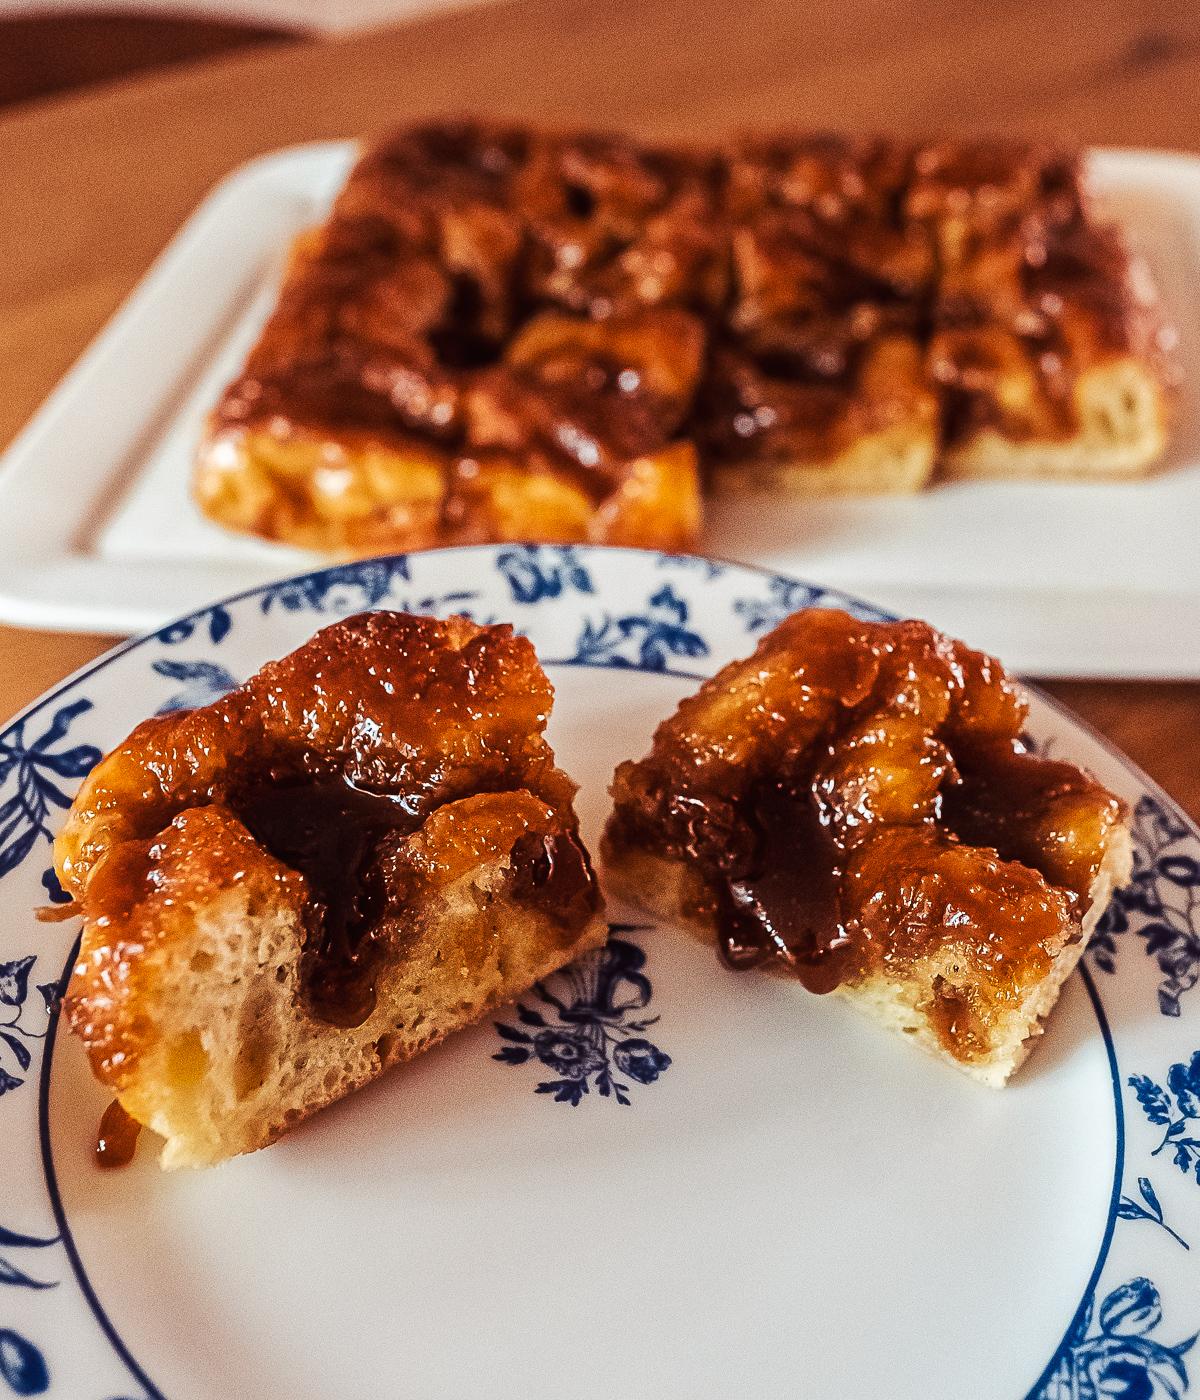 brunsviger danish coffee cake with caramel topping